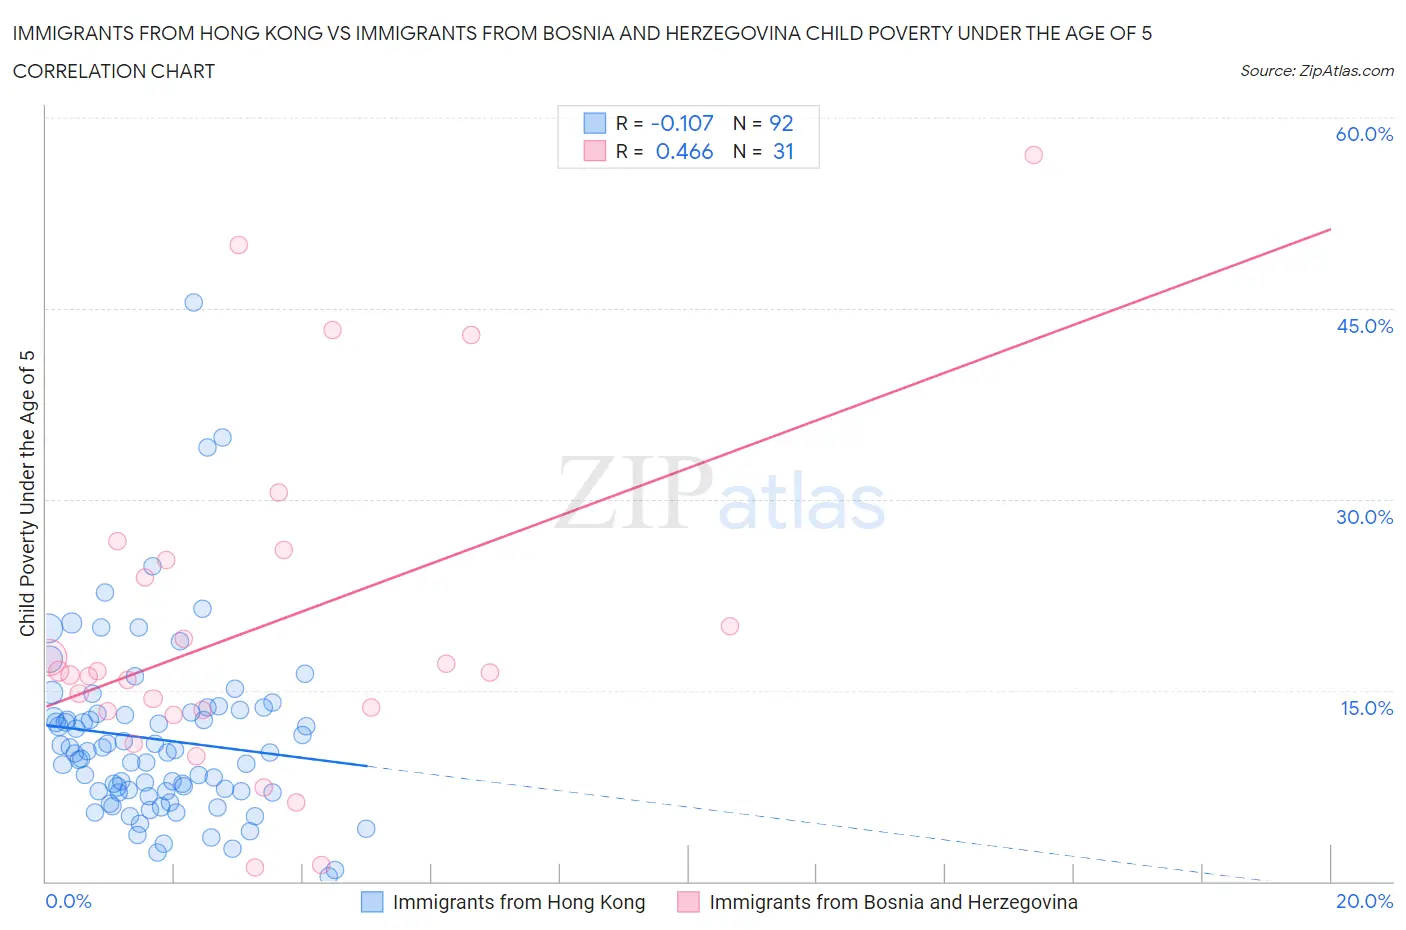 Immigrants from Hong Kong vs Immigrants from Bosnia and Herzegovina Child Poverty Under the Age of 5